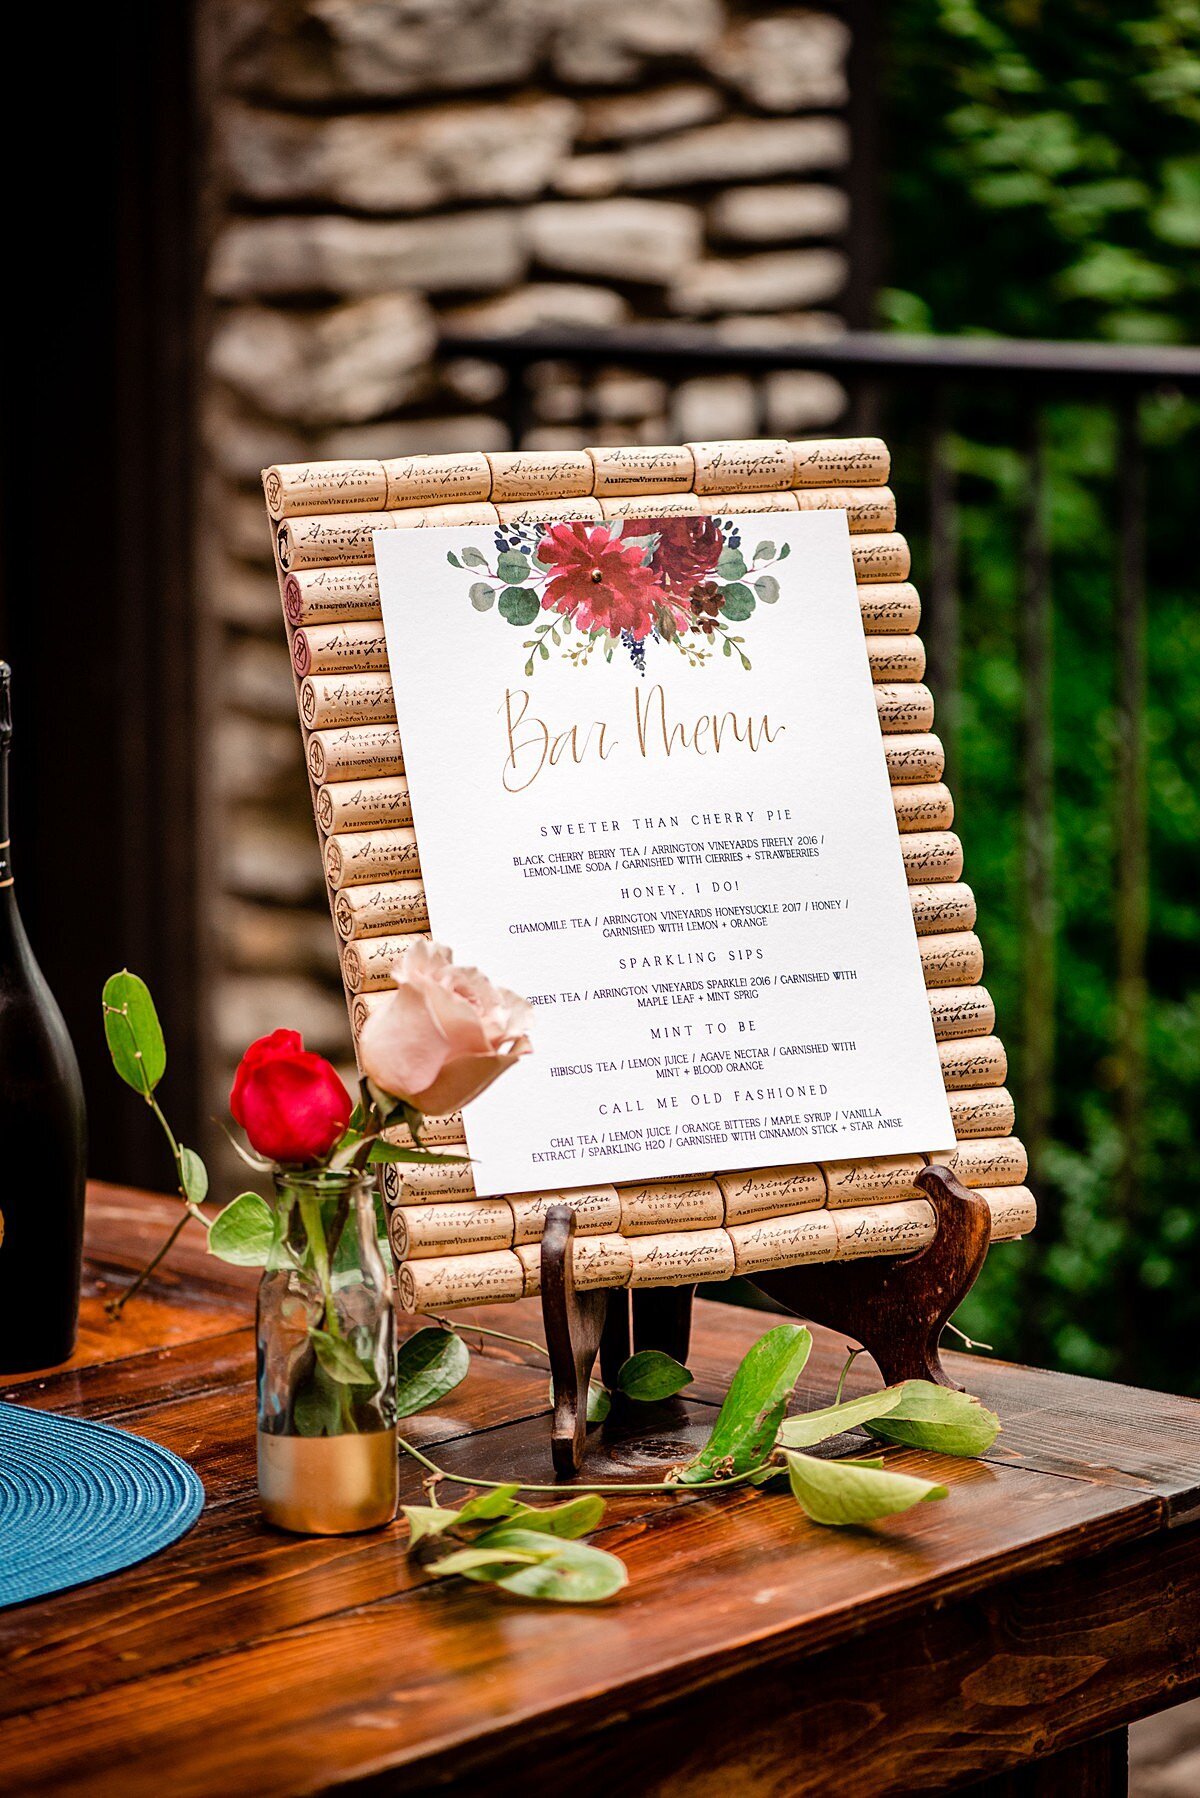 Signature cocktail bar menu decorated with red and burgundy flowers and greenery attached to a background made of wine corks on a small easel. The bar sign sits on a wood farm table with a glass and gold bud vase of red and blush roses at Arrington Vineyards.